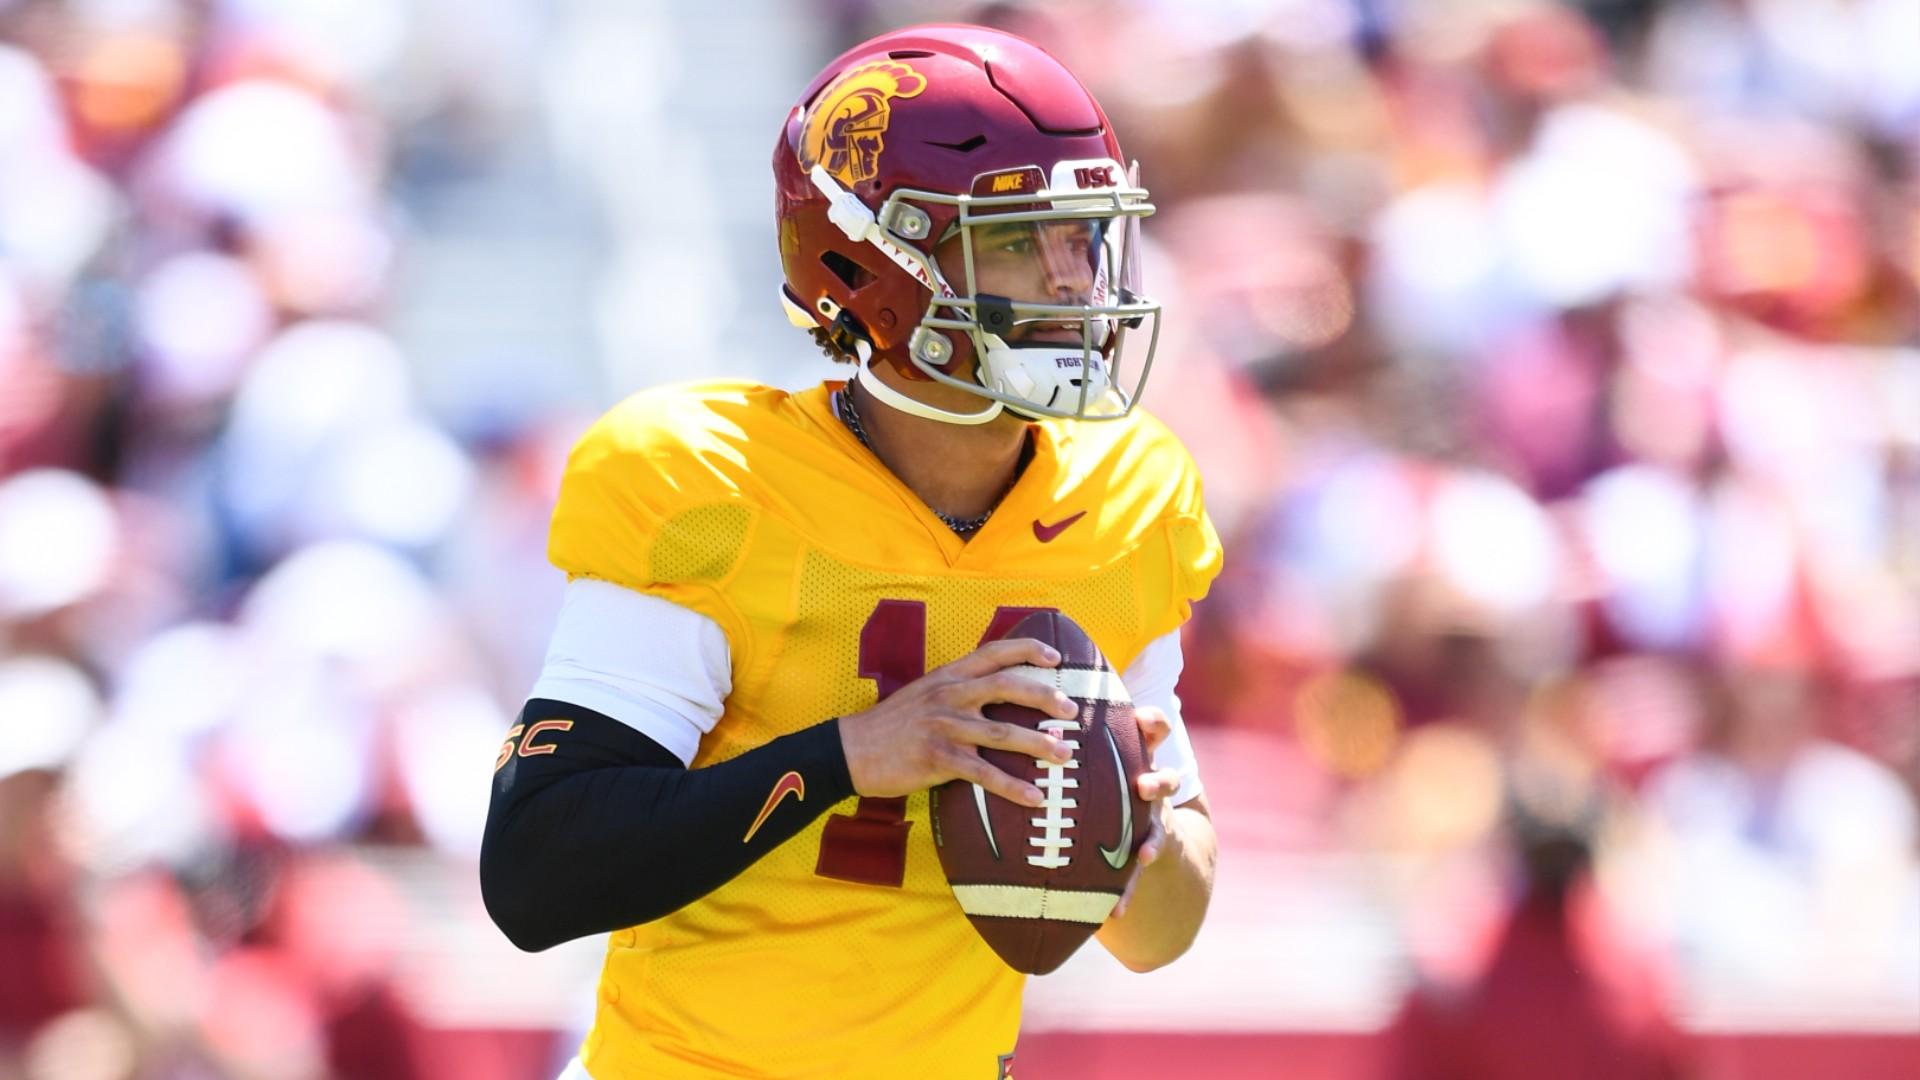 How To Watch USC Vs Rice